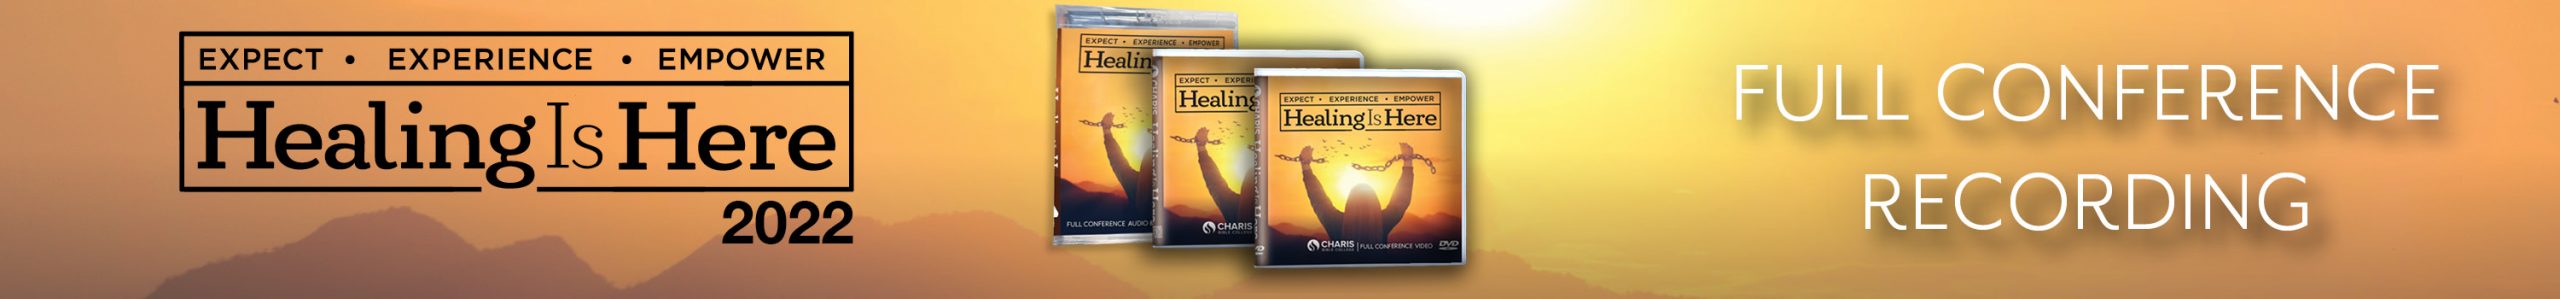 Healing is Here 2022 product offer